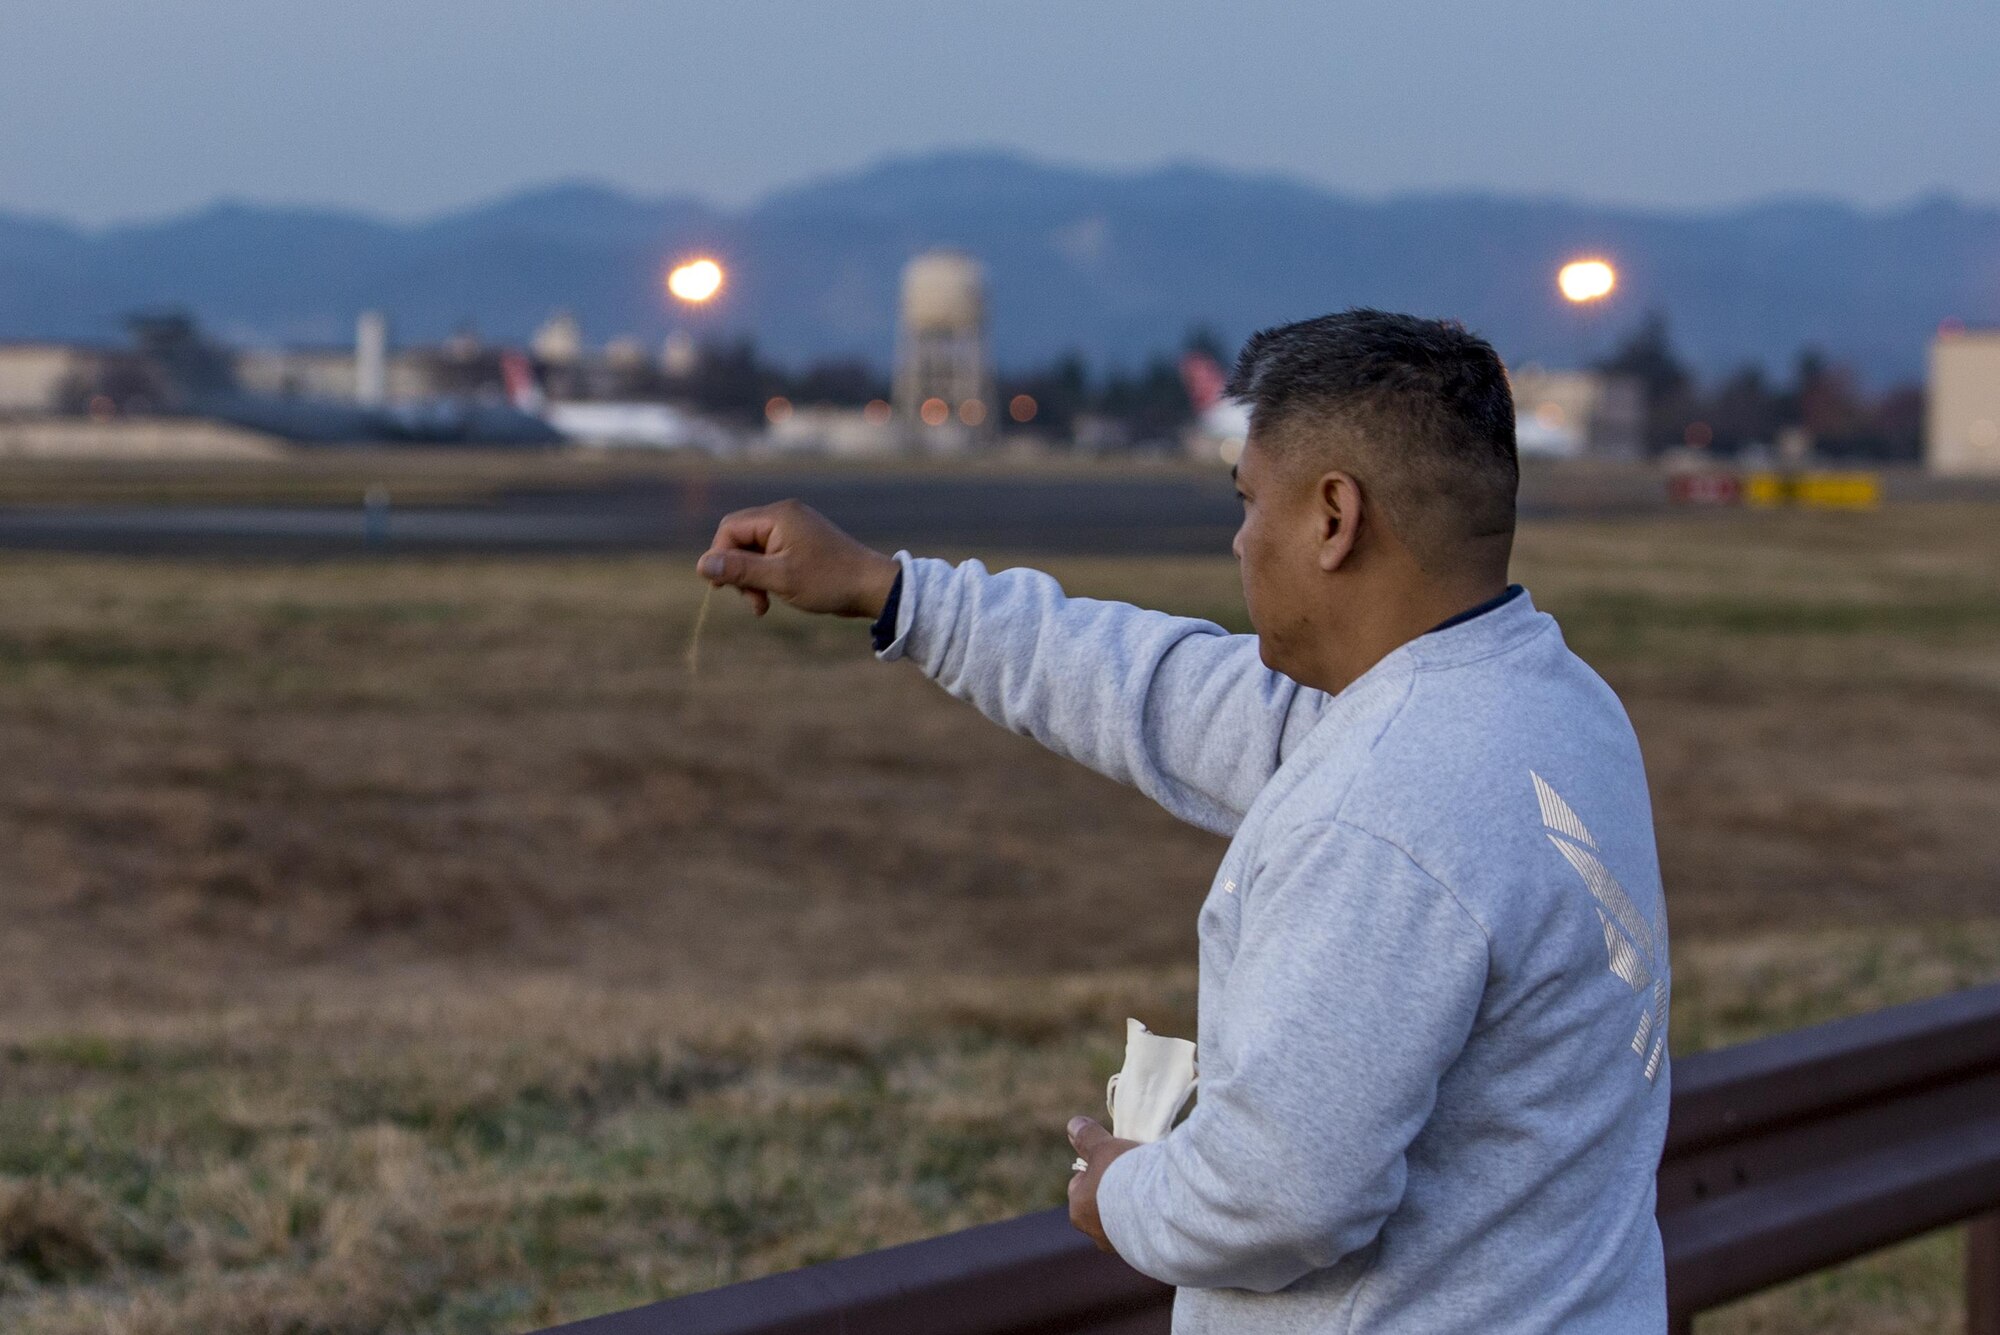 Master Sgt. Edward M. Silversmith, 374th Maintenance Squadron flight chief, performs a traditional Navajo morning ritual and prayer while sprinkling an offering of corn pollen on Dec. 9, 2016, at Yokota Air Base, Japan. In Navajo culture, it is customary to get up before the sun rise and do the ritual followed by a run east towards the rising sun. (U.S. Air Force photo by Airman 1st Class Donald Hudson)